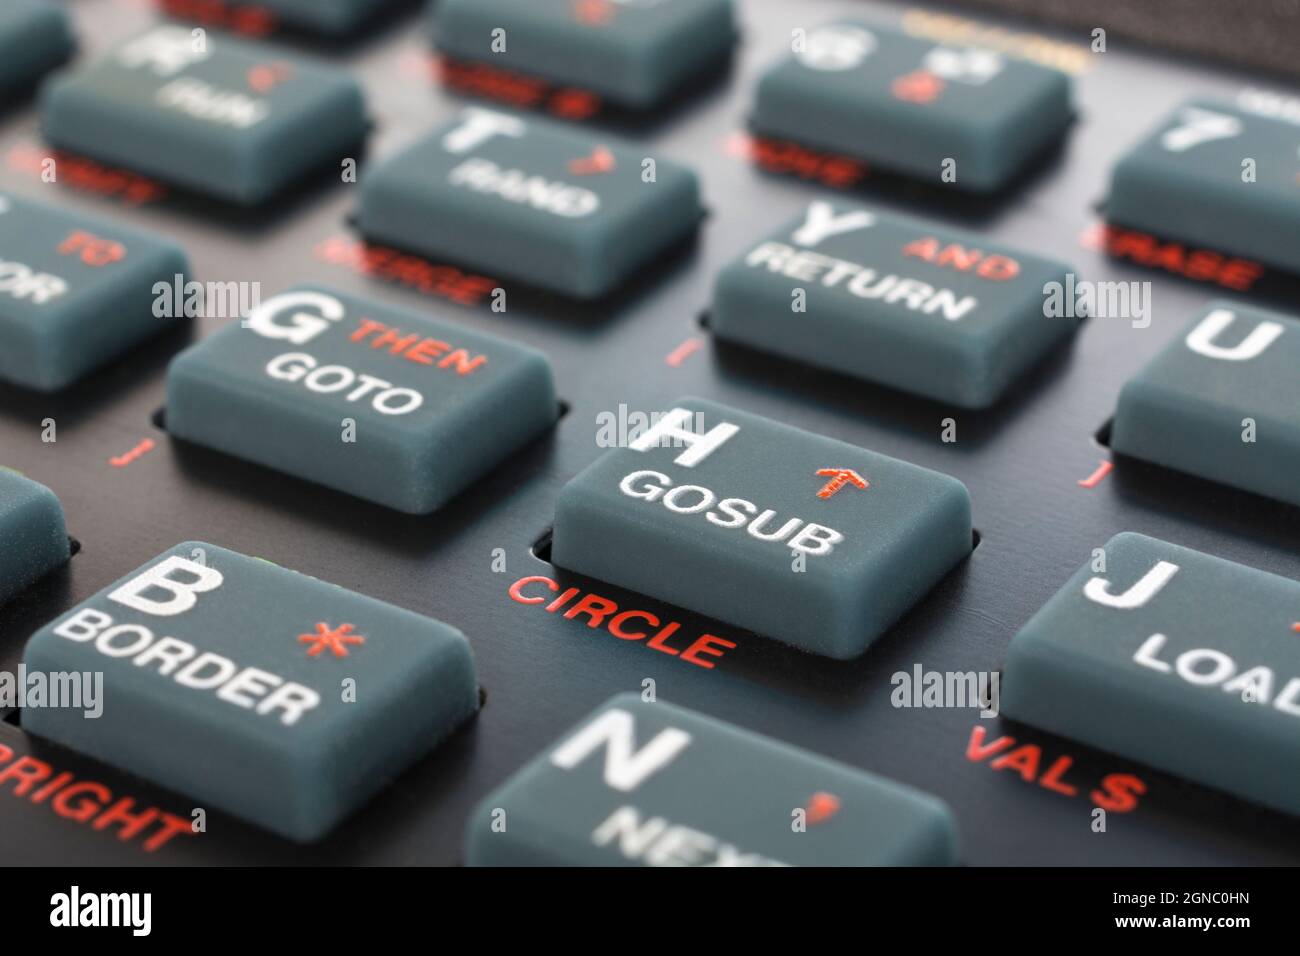 Sinclair ZX Spectrum keyboard close-up. Focus on Basic GOSUB command key. Vintage 8-bit home computer from 1980s (see Notes). Stock Photo